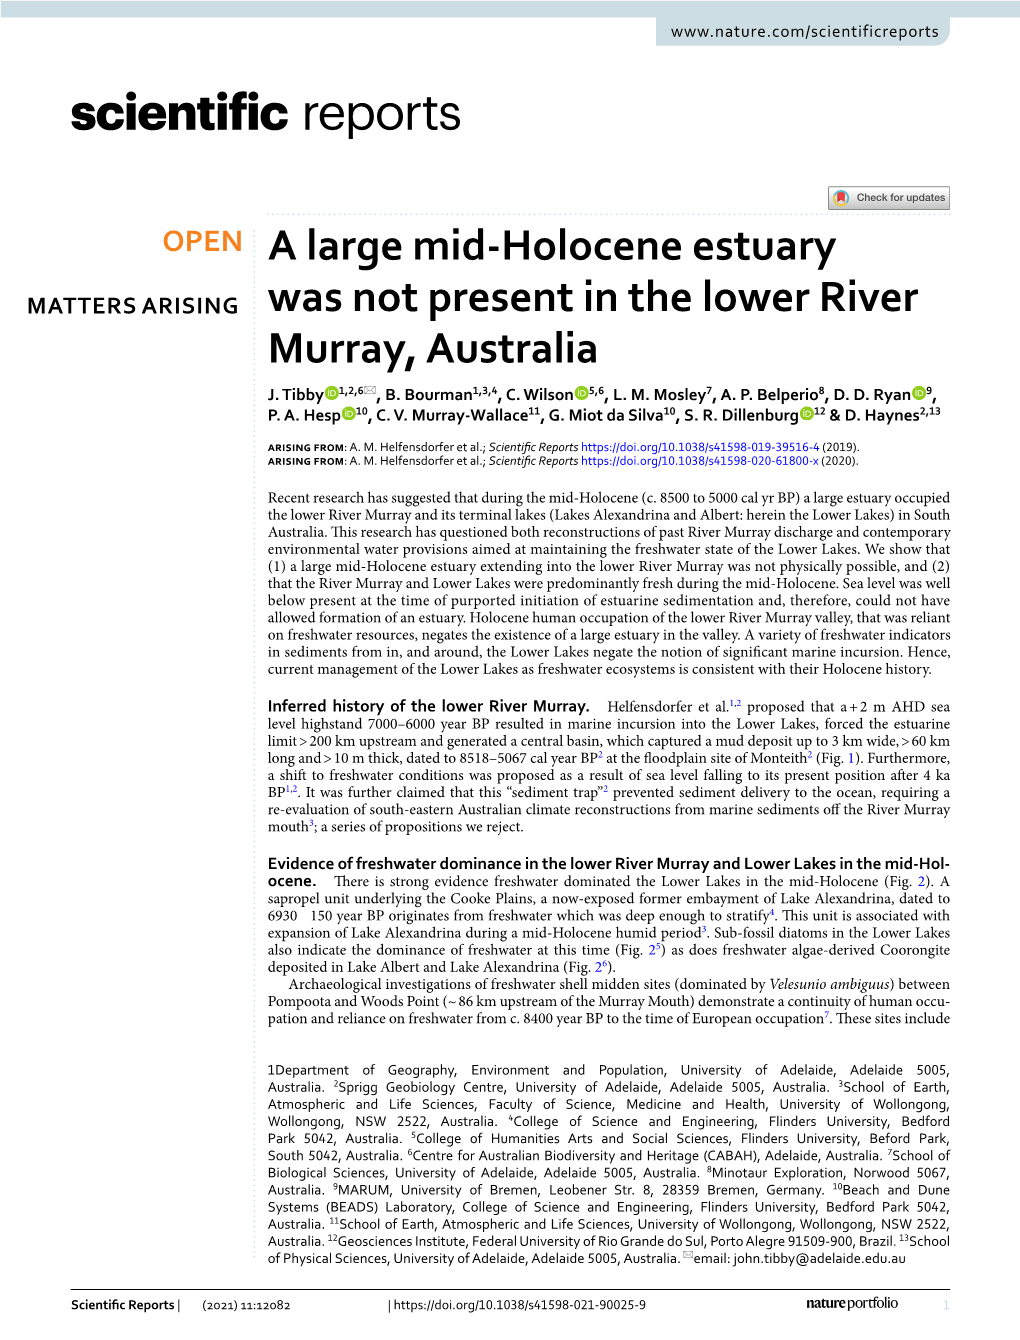 A Large Mid-Holocene Estuary Was Not Present in the Lower River Murray